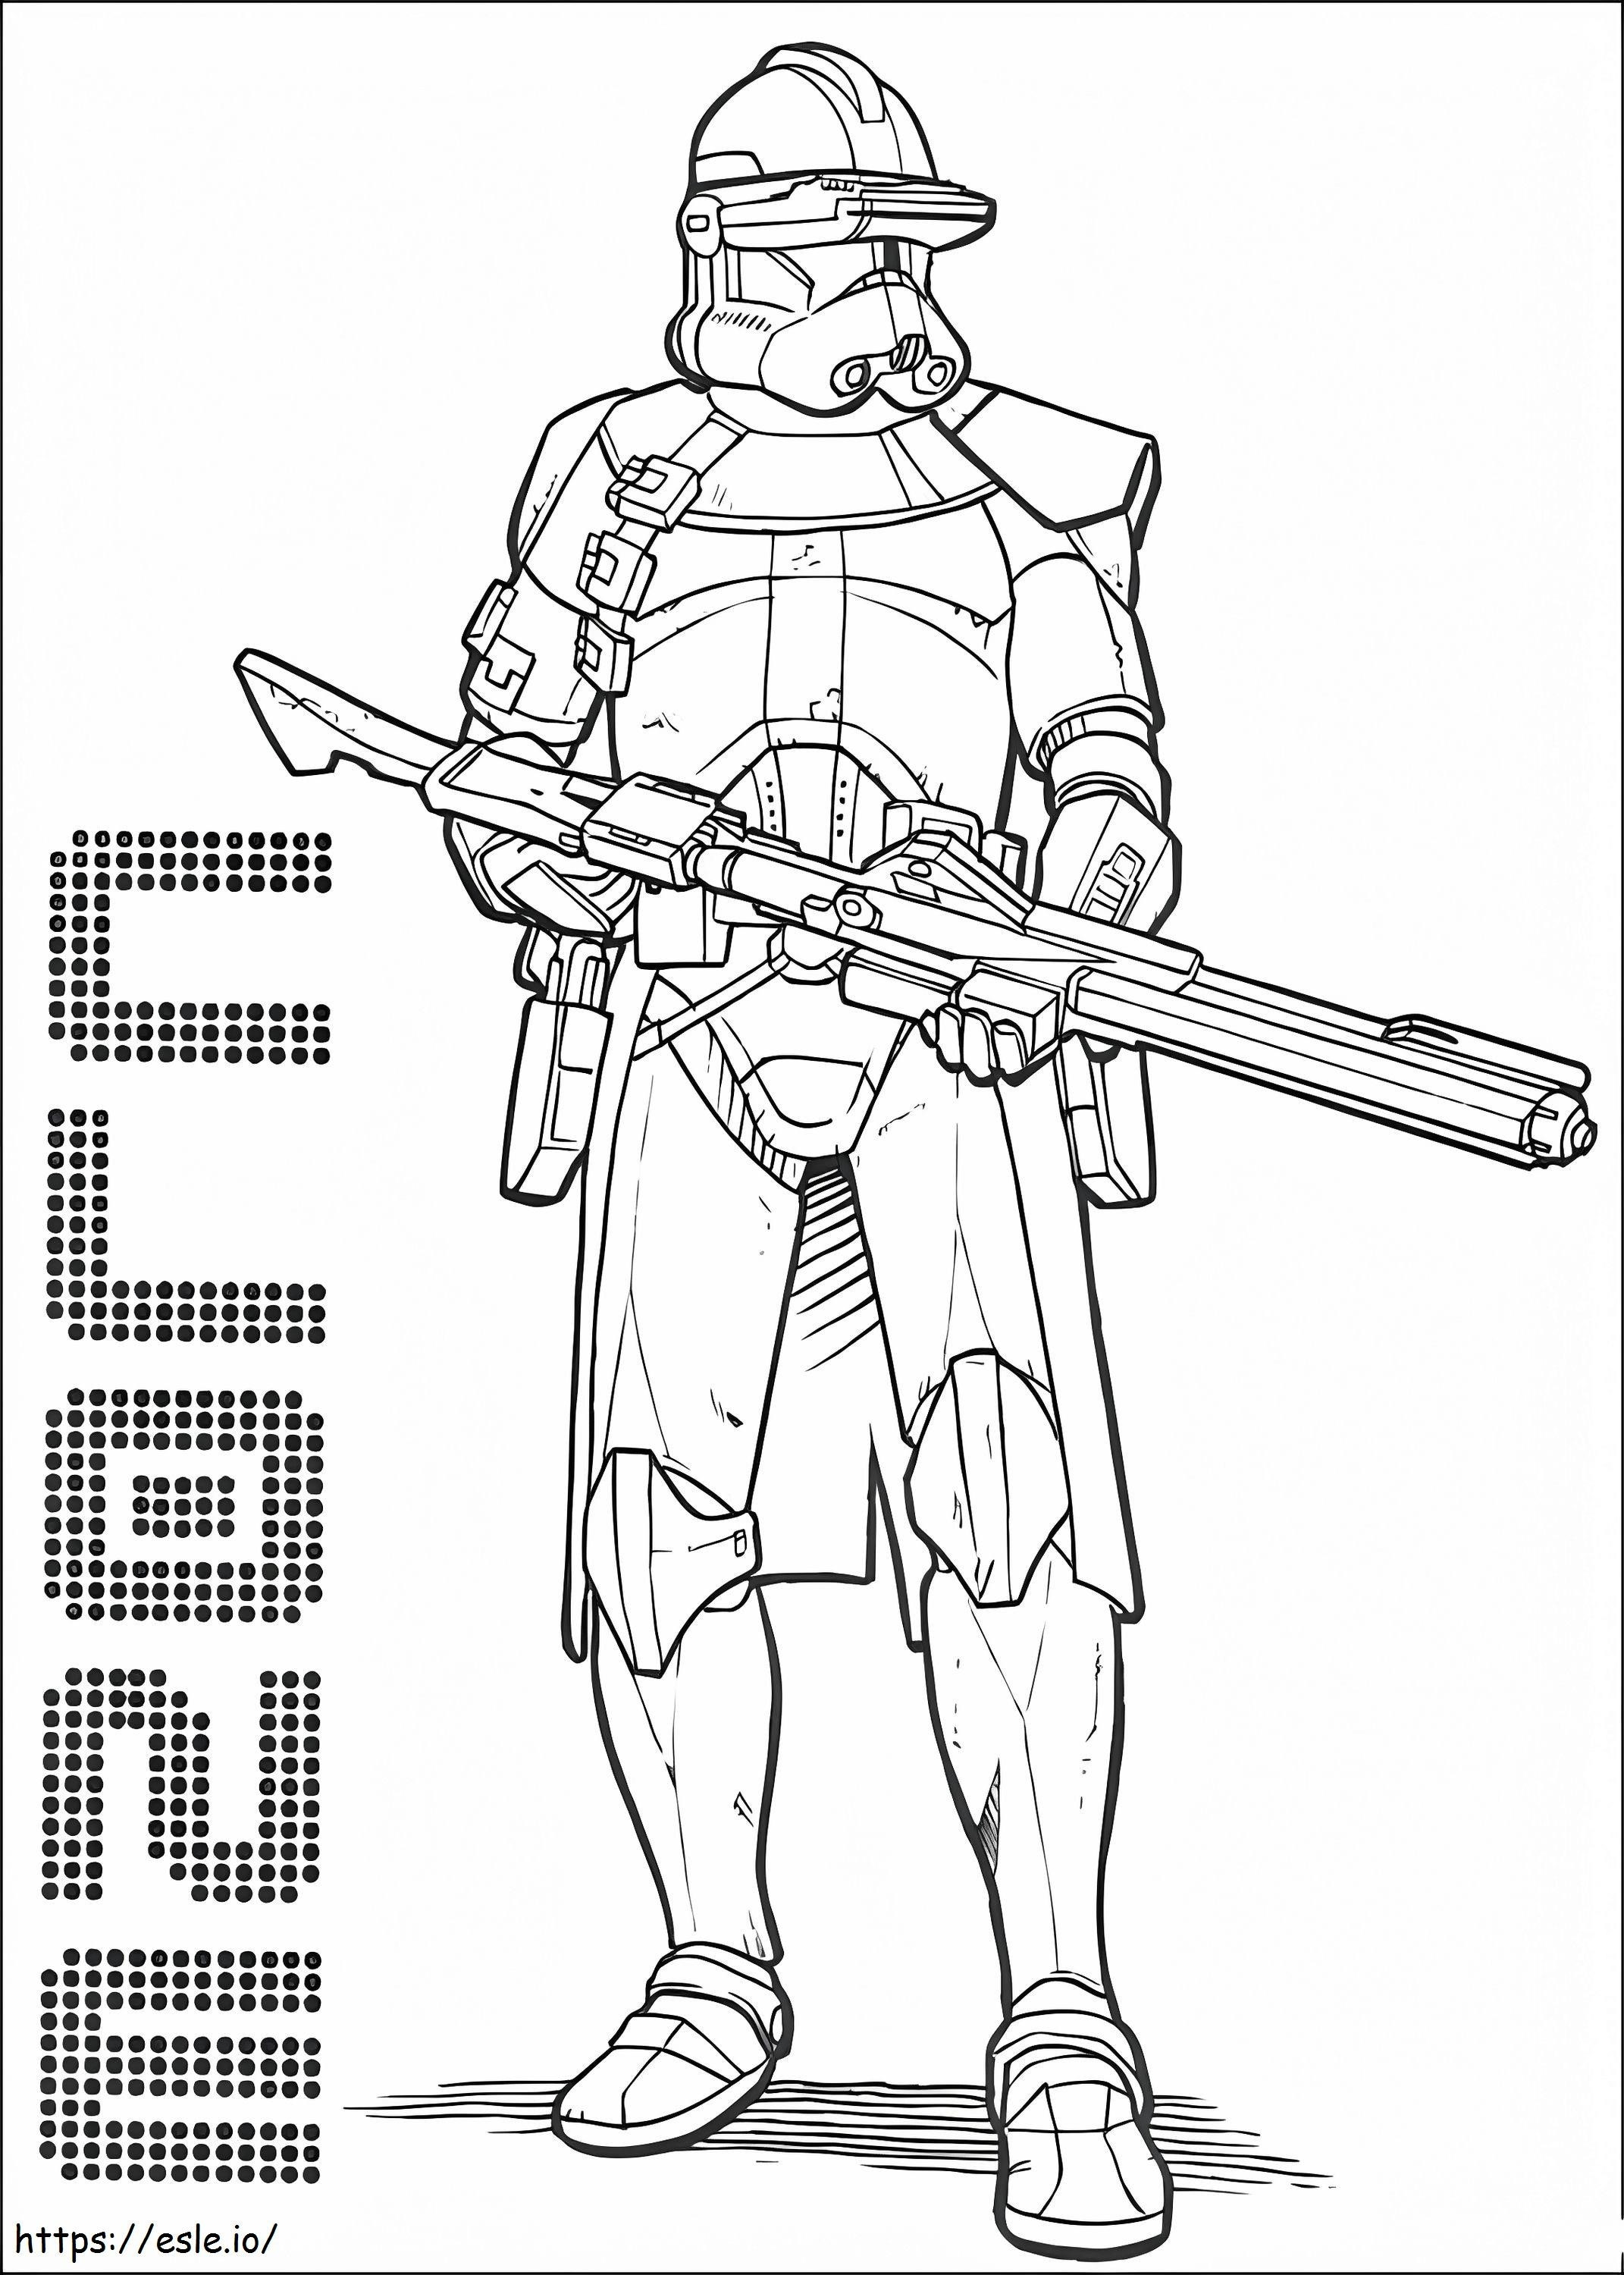 Star Wars Character 3 coloring page